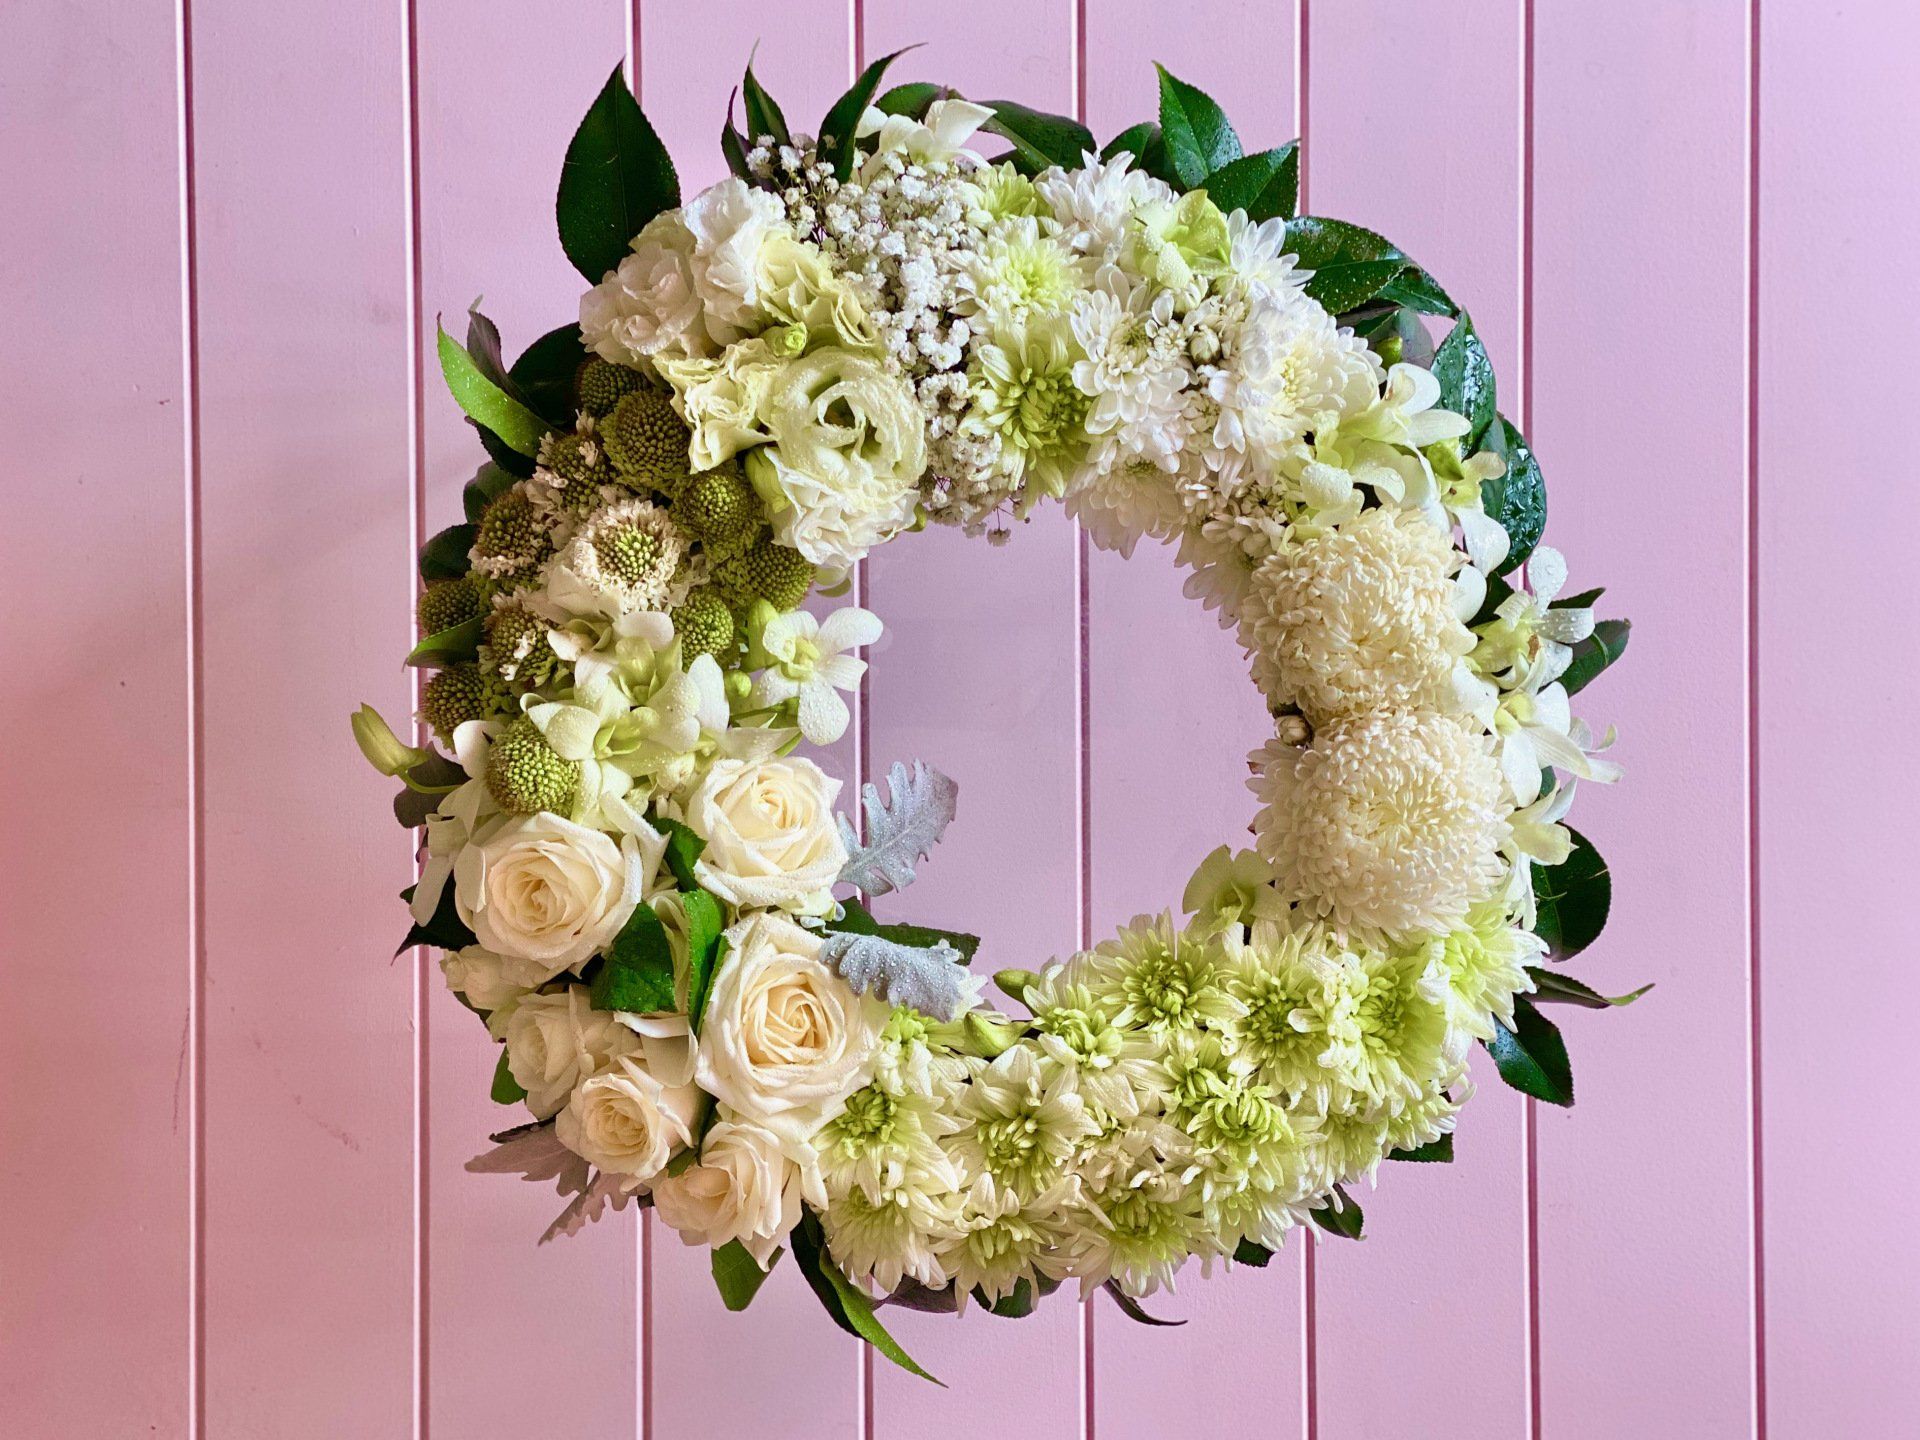 Handcrafted wreath from Darwin's florist, ideal for commemorating events.